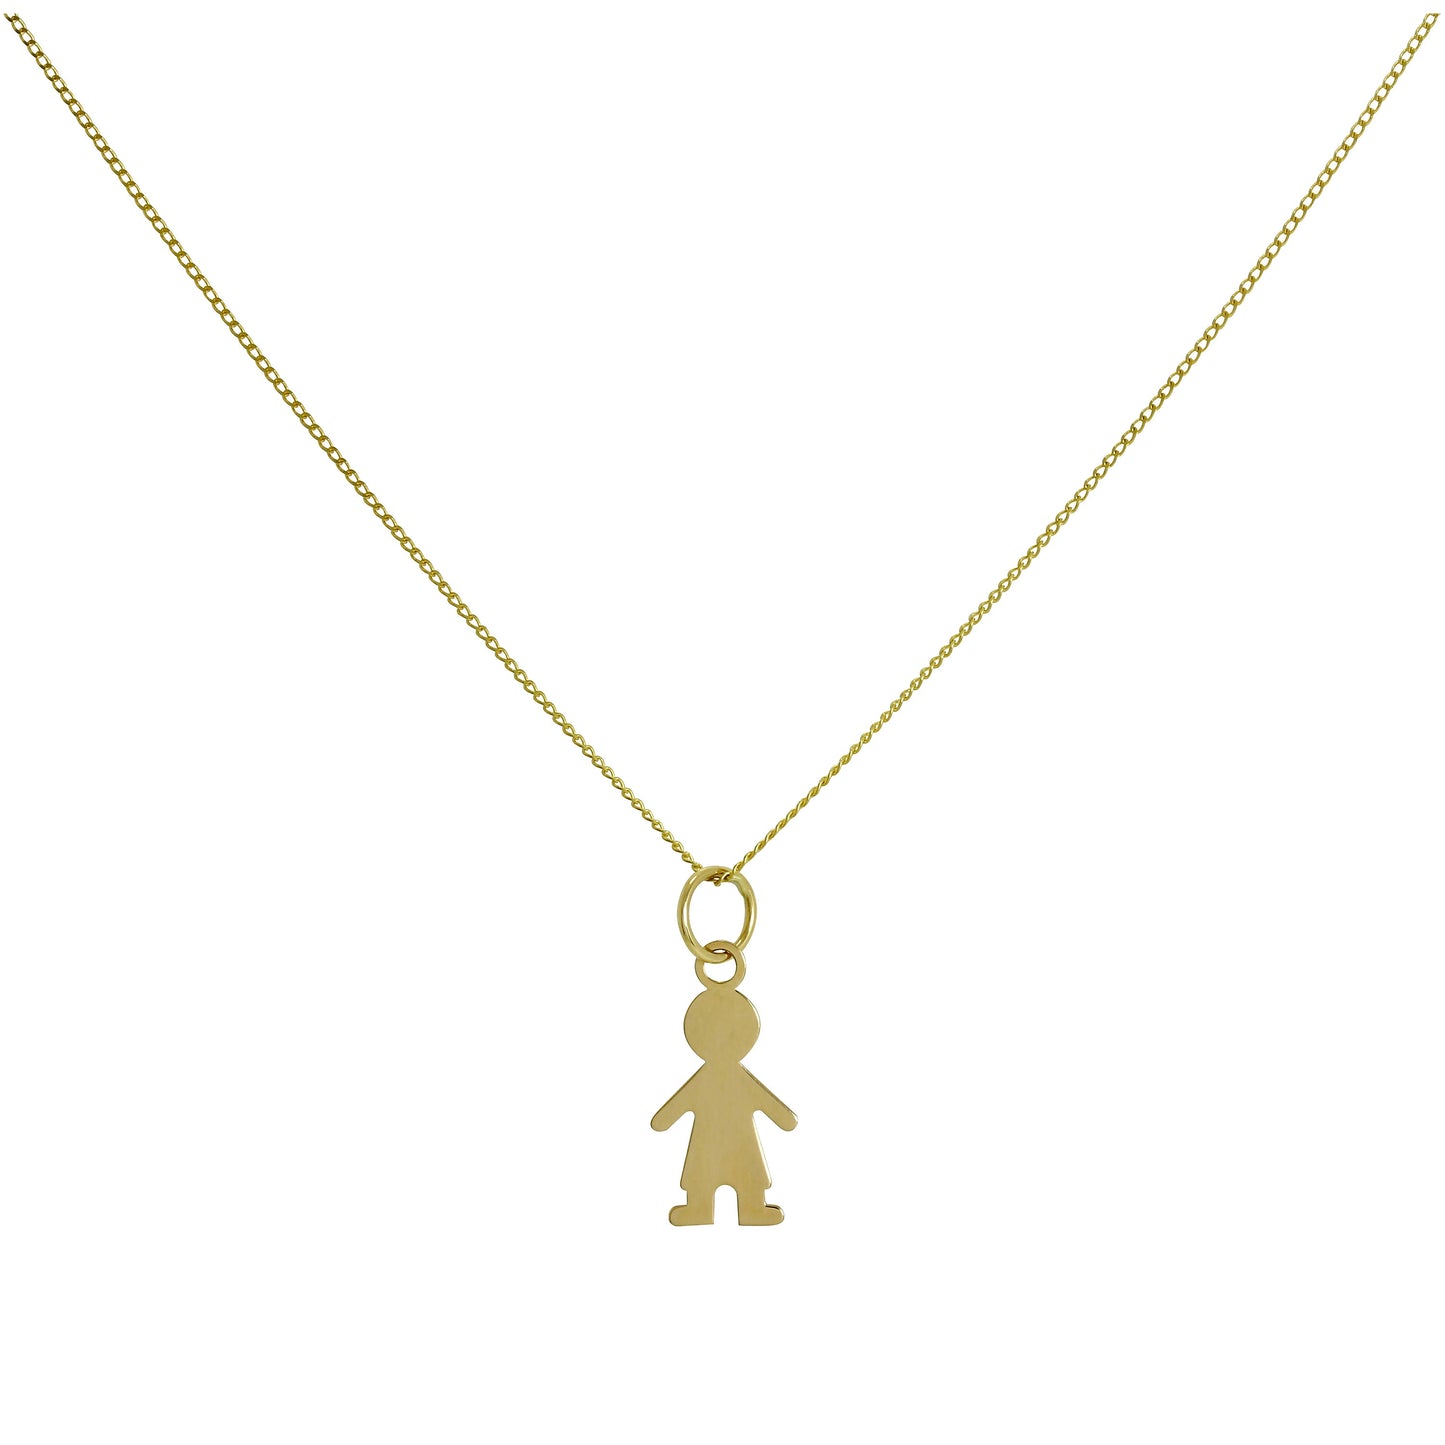 9ct Gold Ragdoll Boy Pendant Necklace 16 - 20 Inches